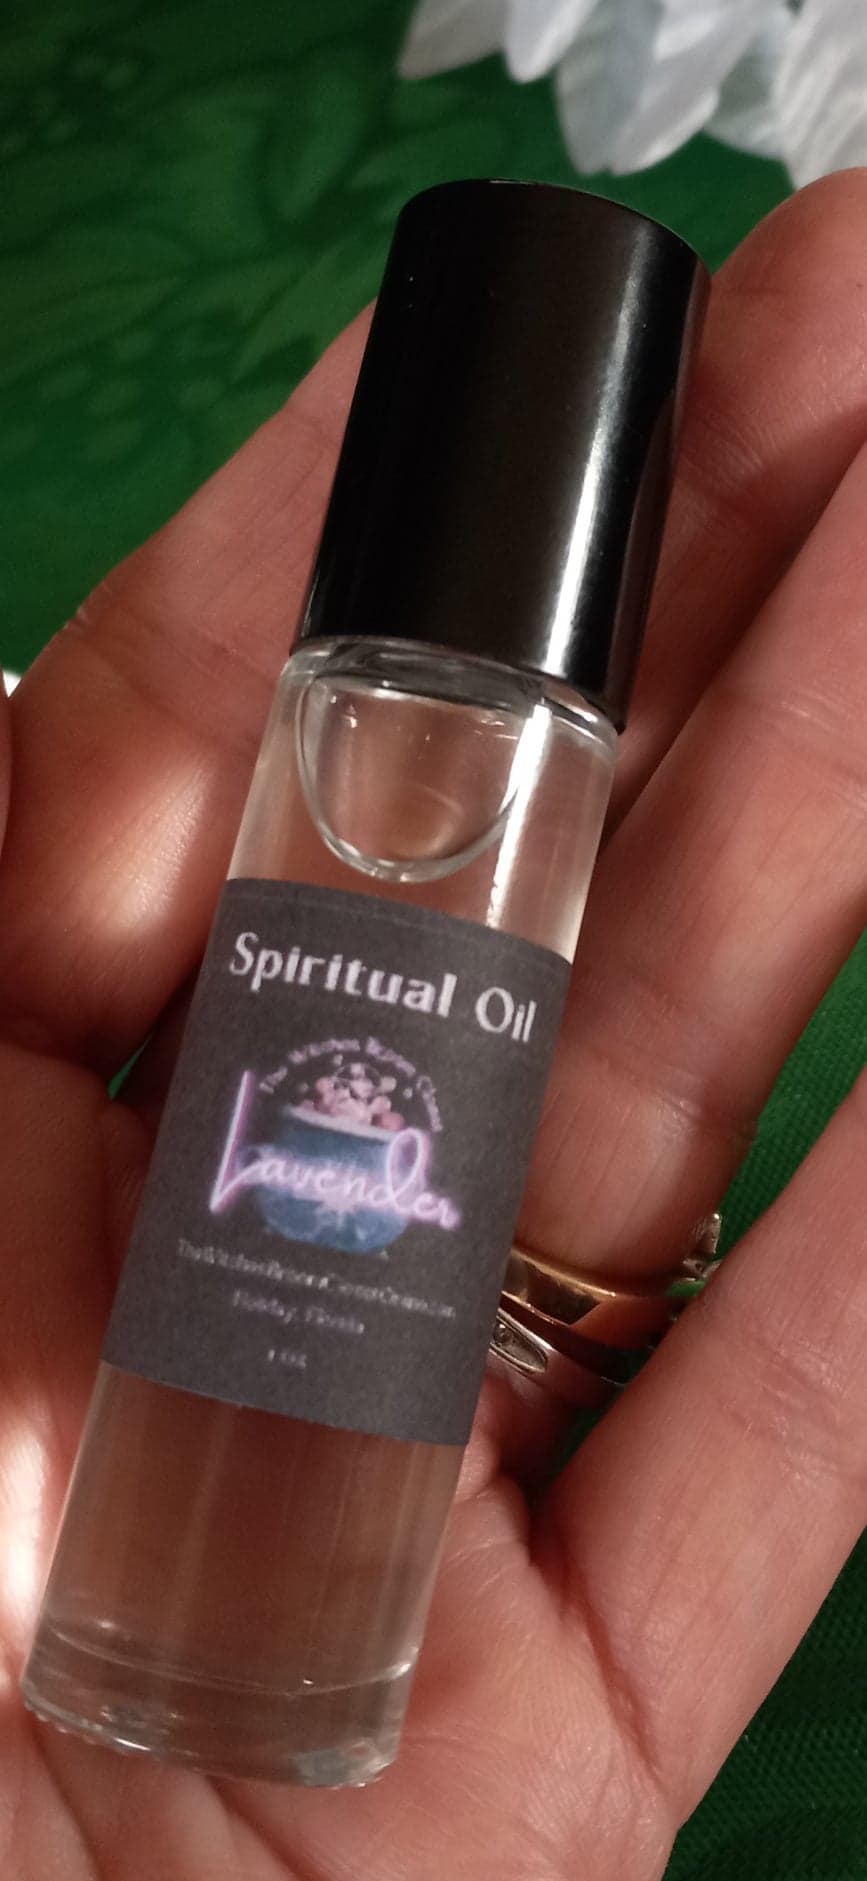 Goddess Tarot Reading /&Oil by Sister SpellBinder (Mailed to you by USPS)